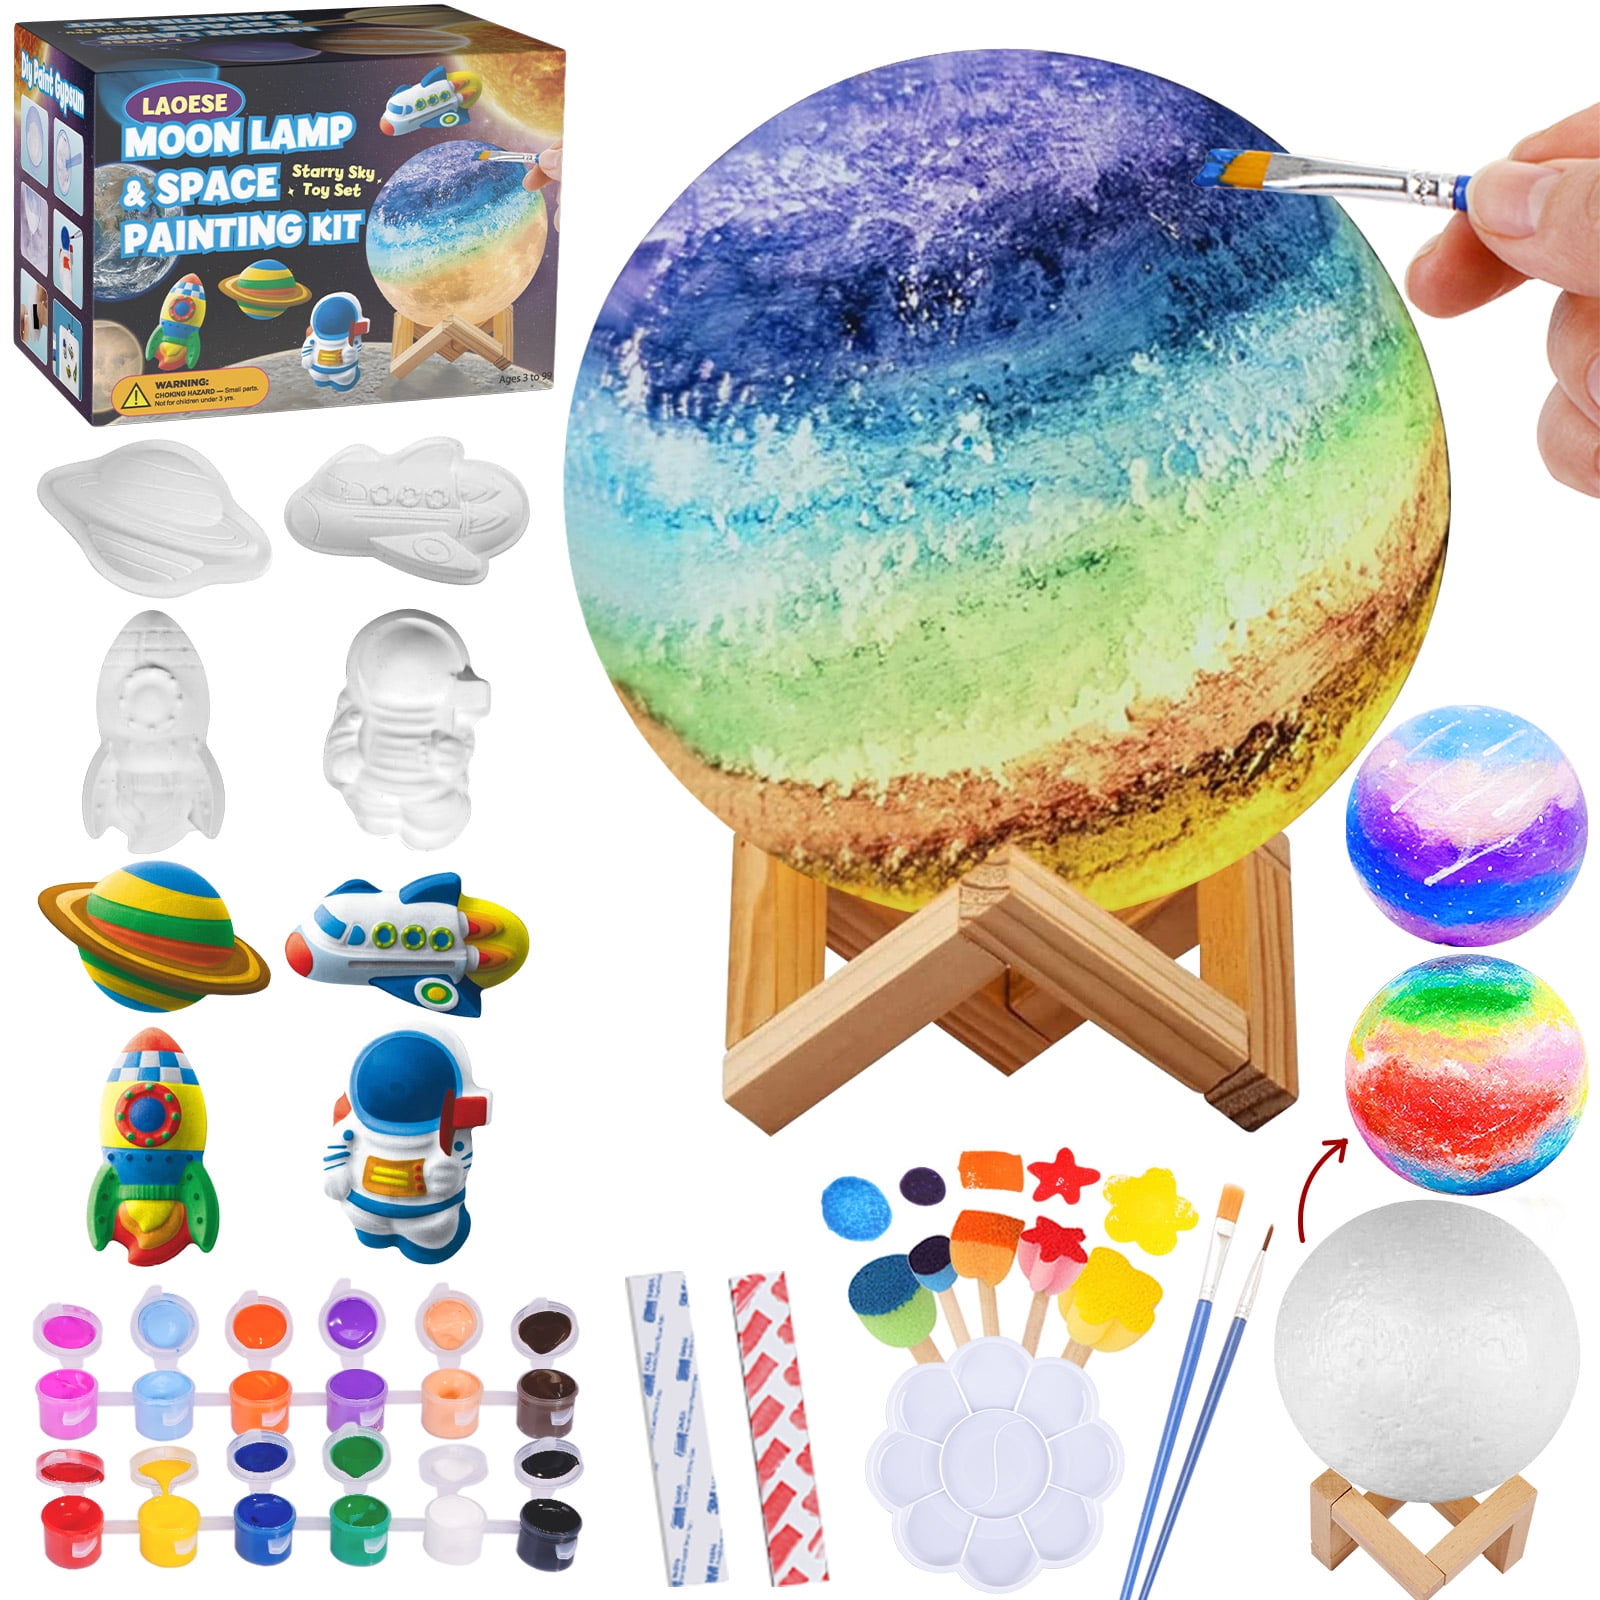 Sybedu Paint Your Own Moon Lamp Kit,Christmas Gifts 16 Colors